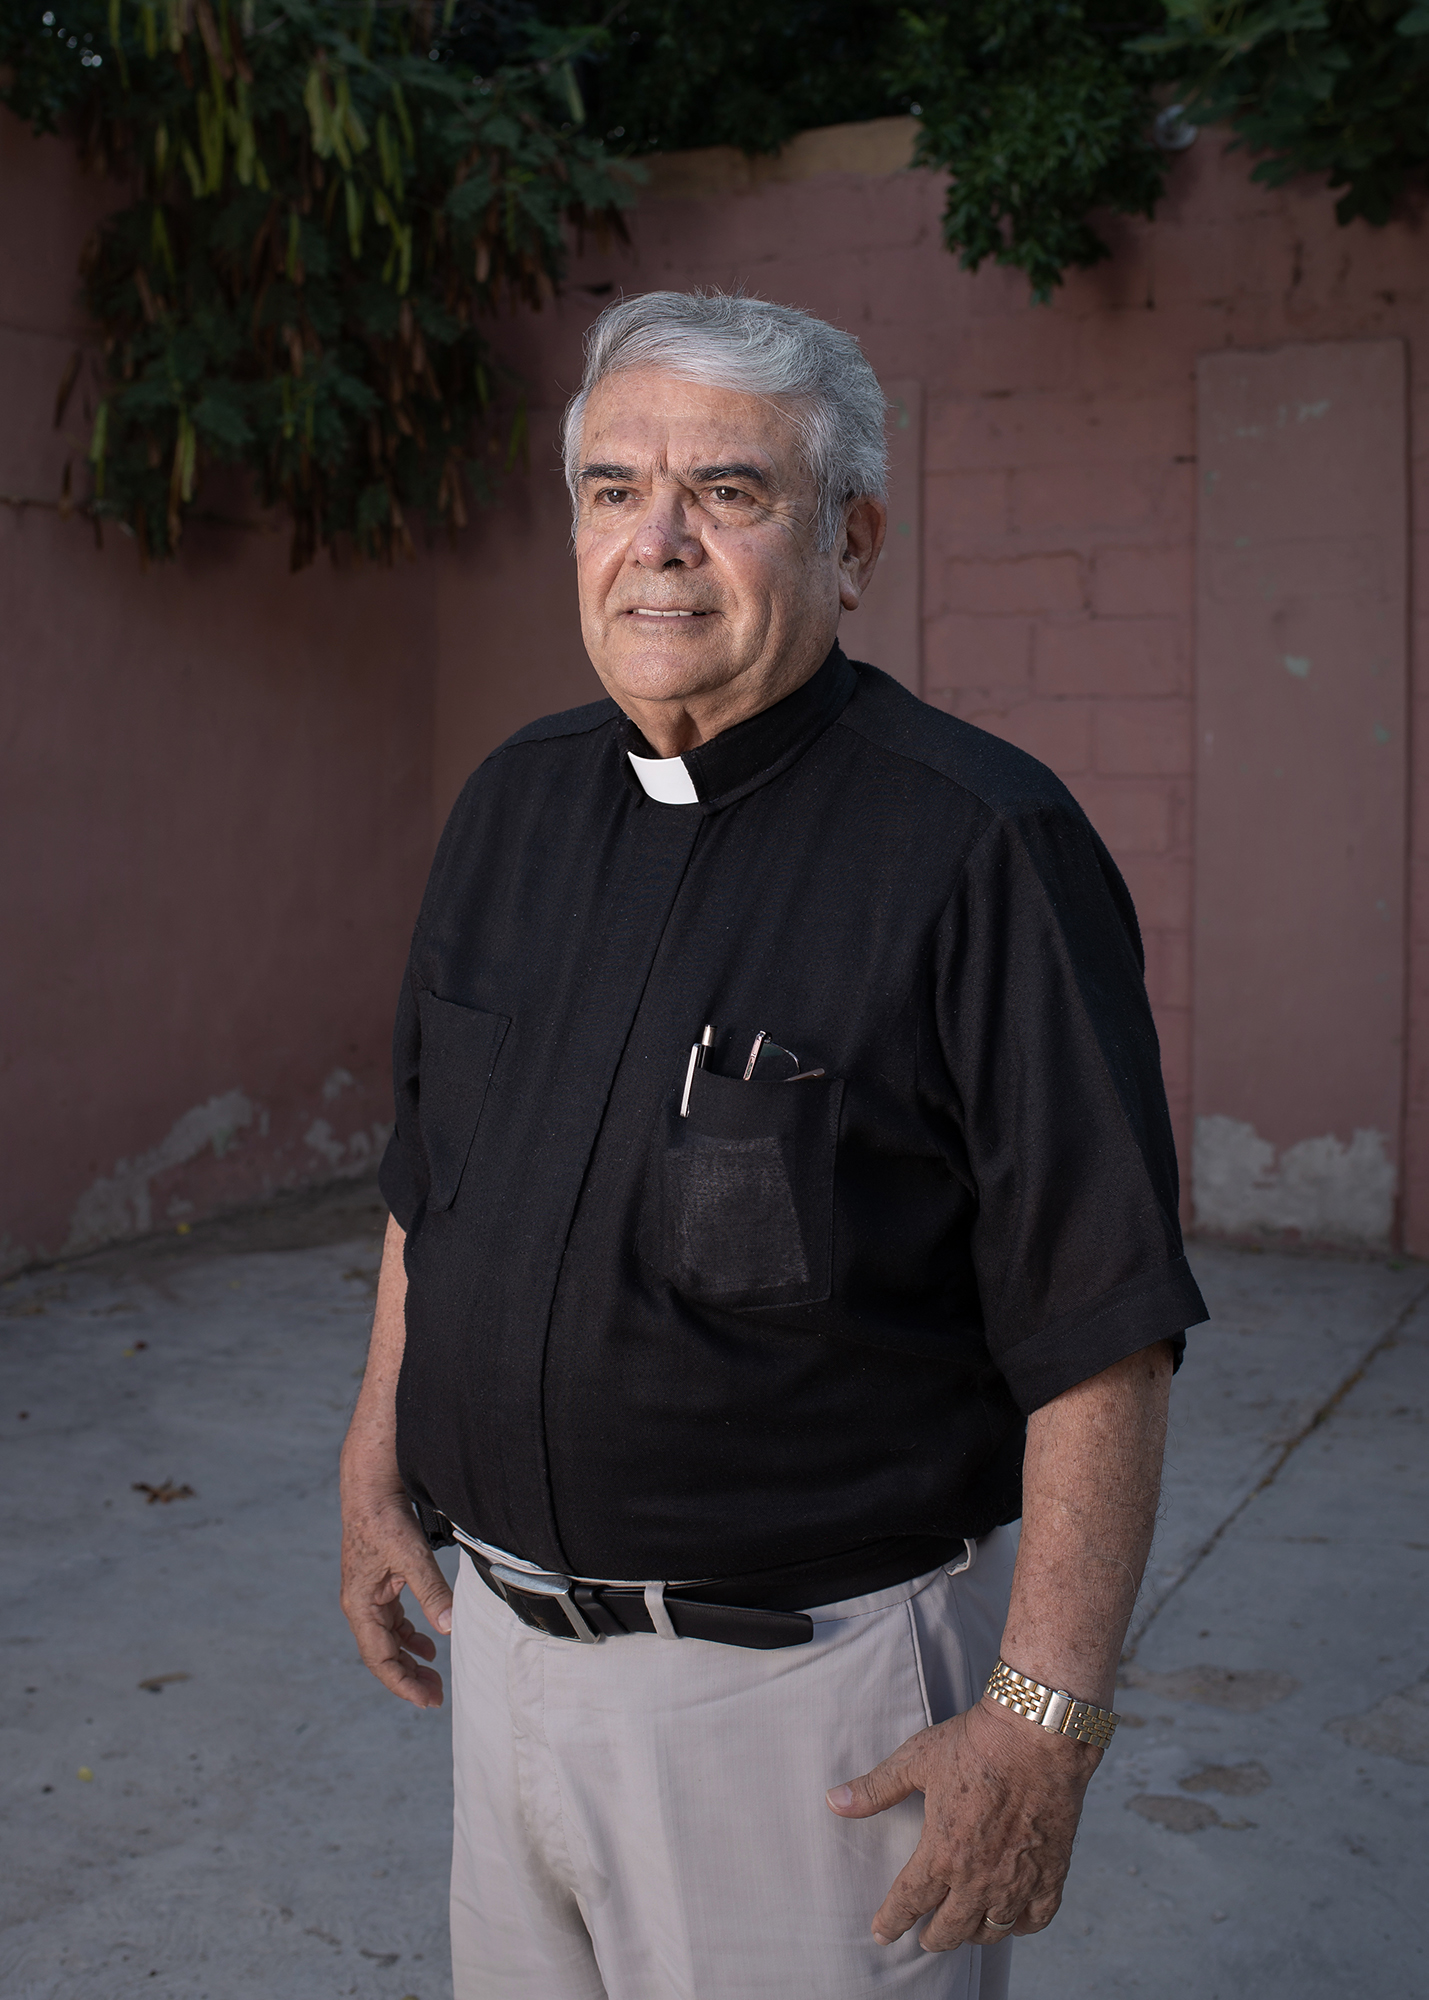  Portrait of priest Jose Guadalupe Valdes Alvarado, creator of "Casa del Migrante Frontera Digna" and the dining room for migrants. The priest has a strong commitment helping people who arrive at Piedras Negras after a hard road with the intention of